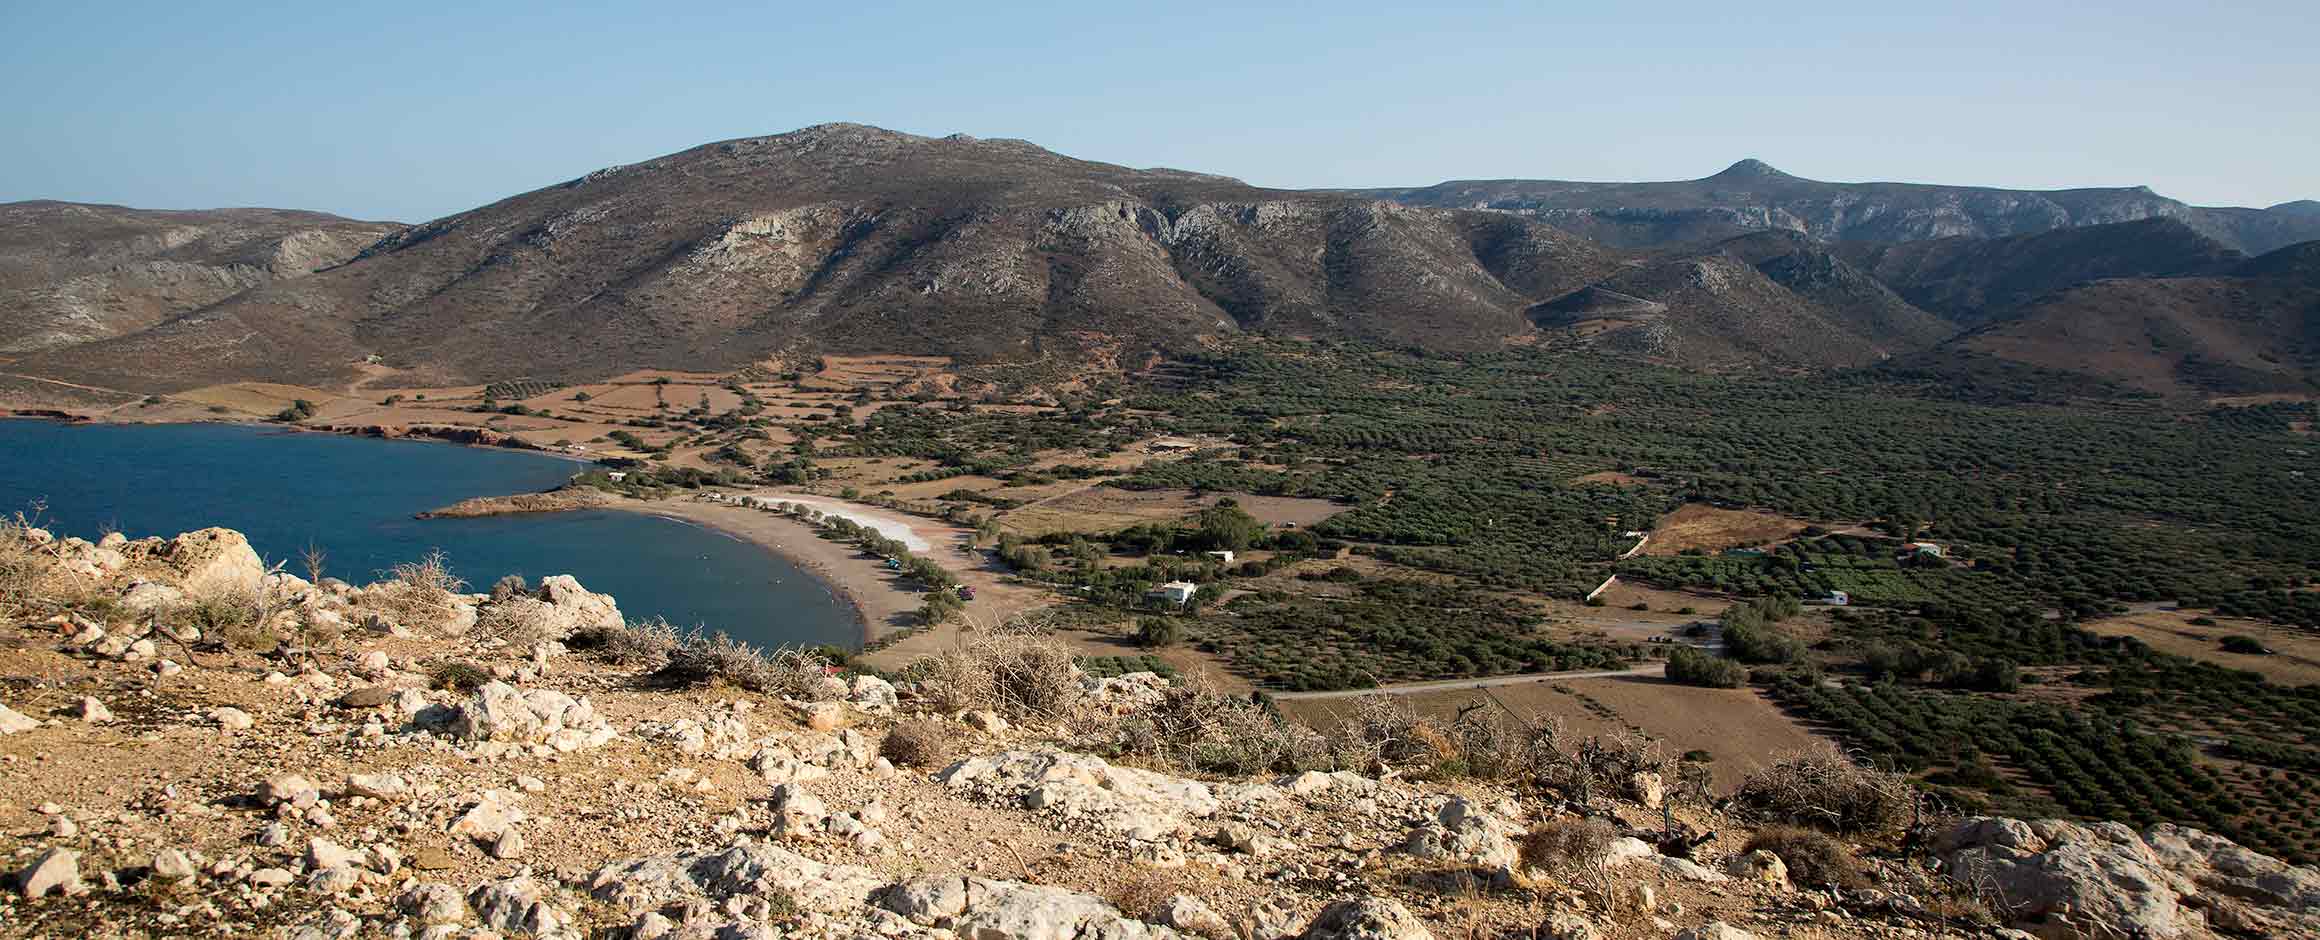 The Roussolakkos plain in eastern Crete viewed from the Kastri hill, with Mount Petsophas in the background